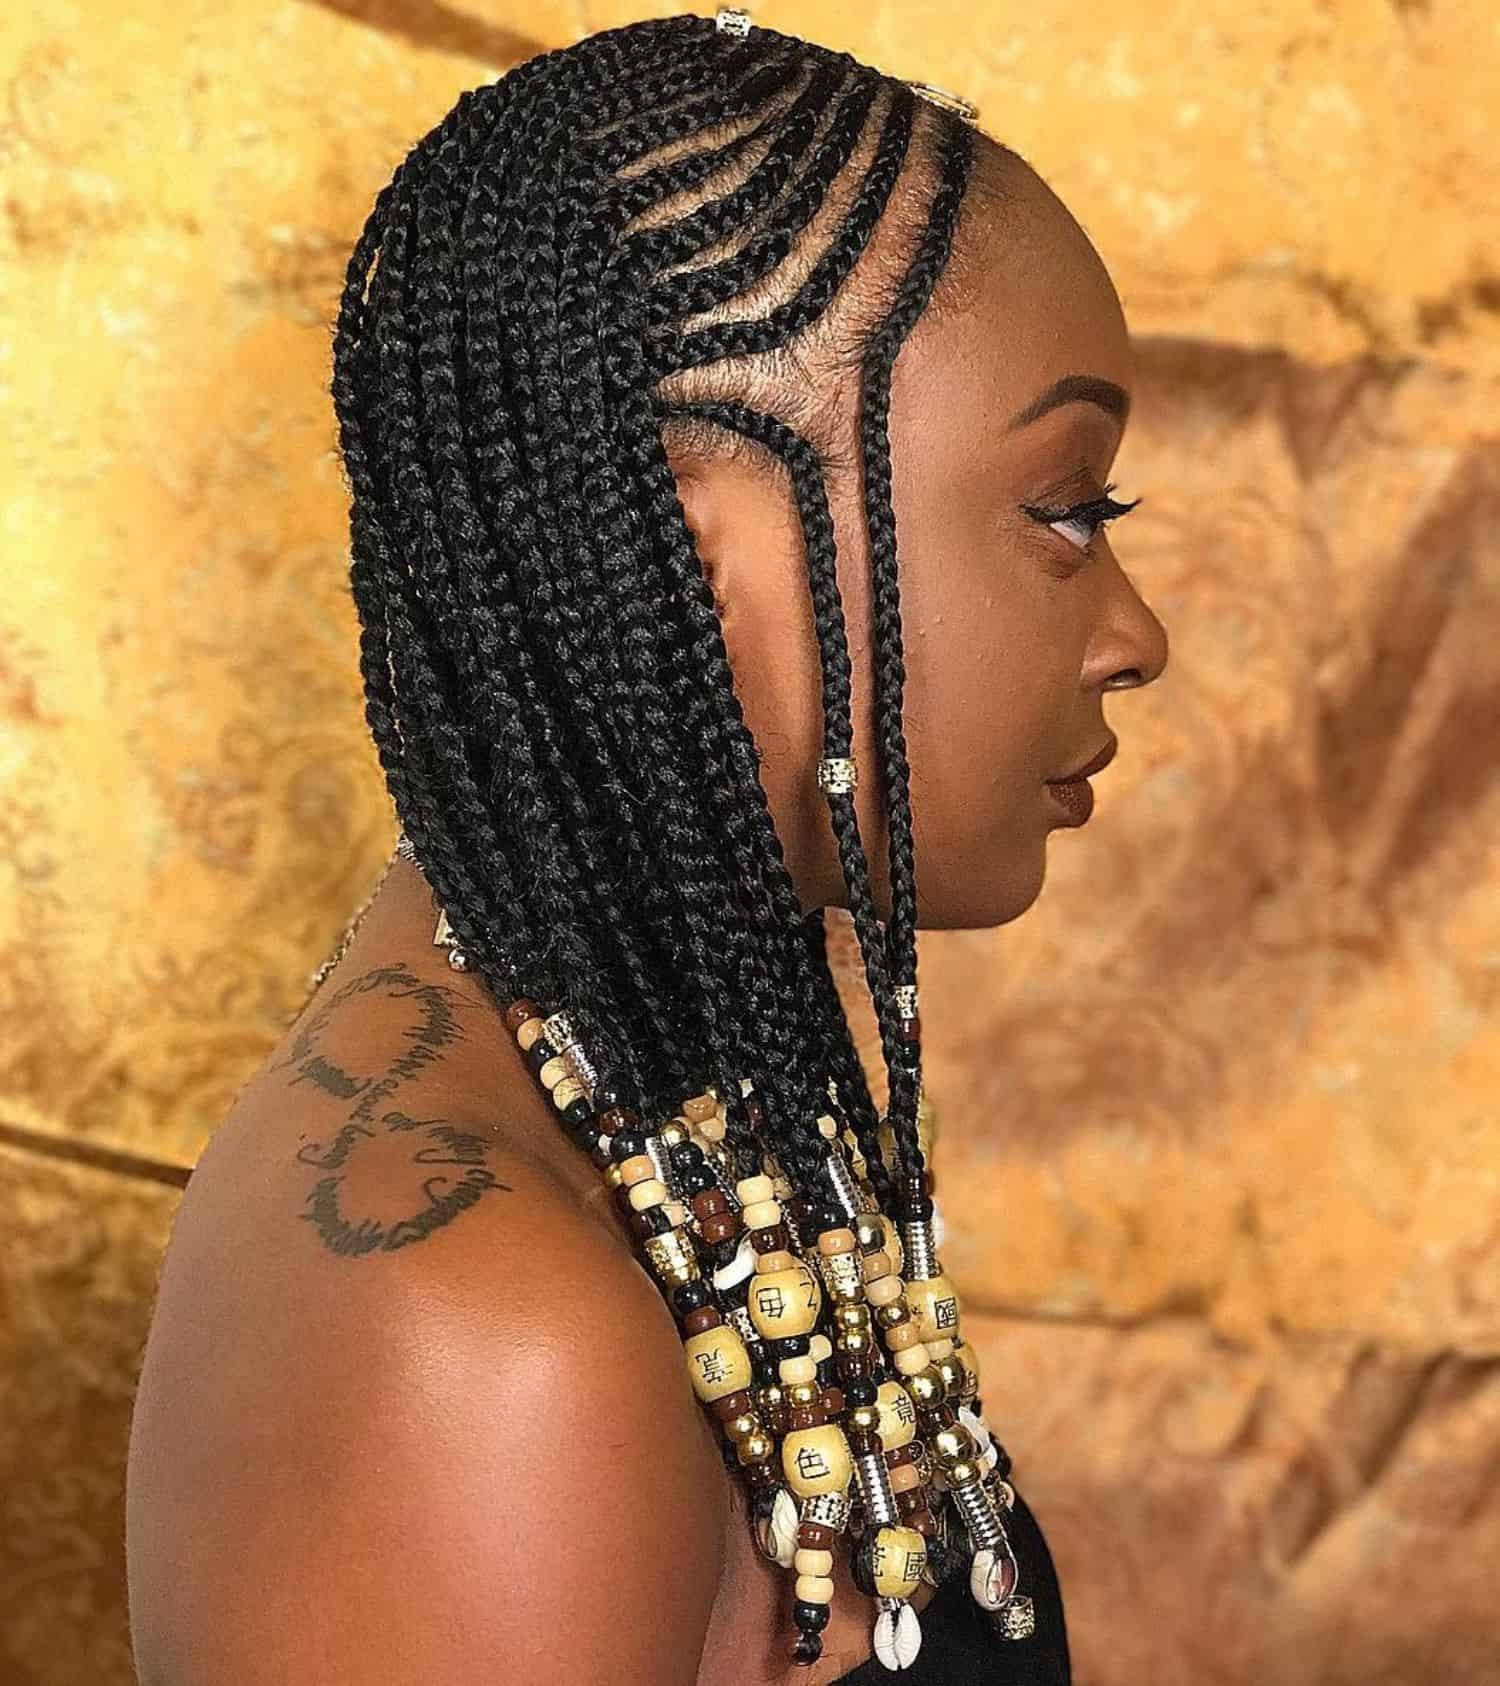 Black Braids Hairstyle
 30 Black Braided Hairstyles You Can Try For a Fancy